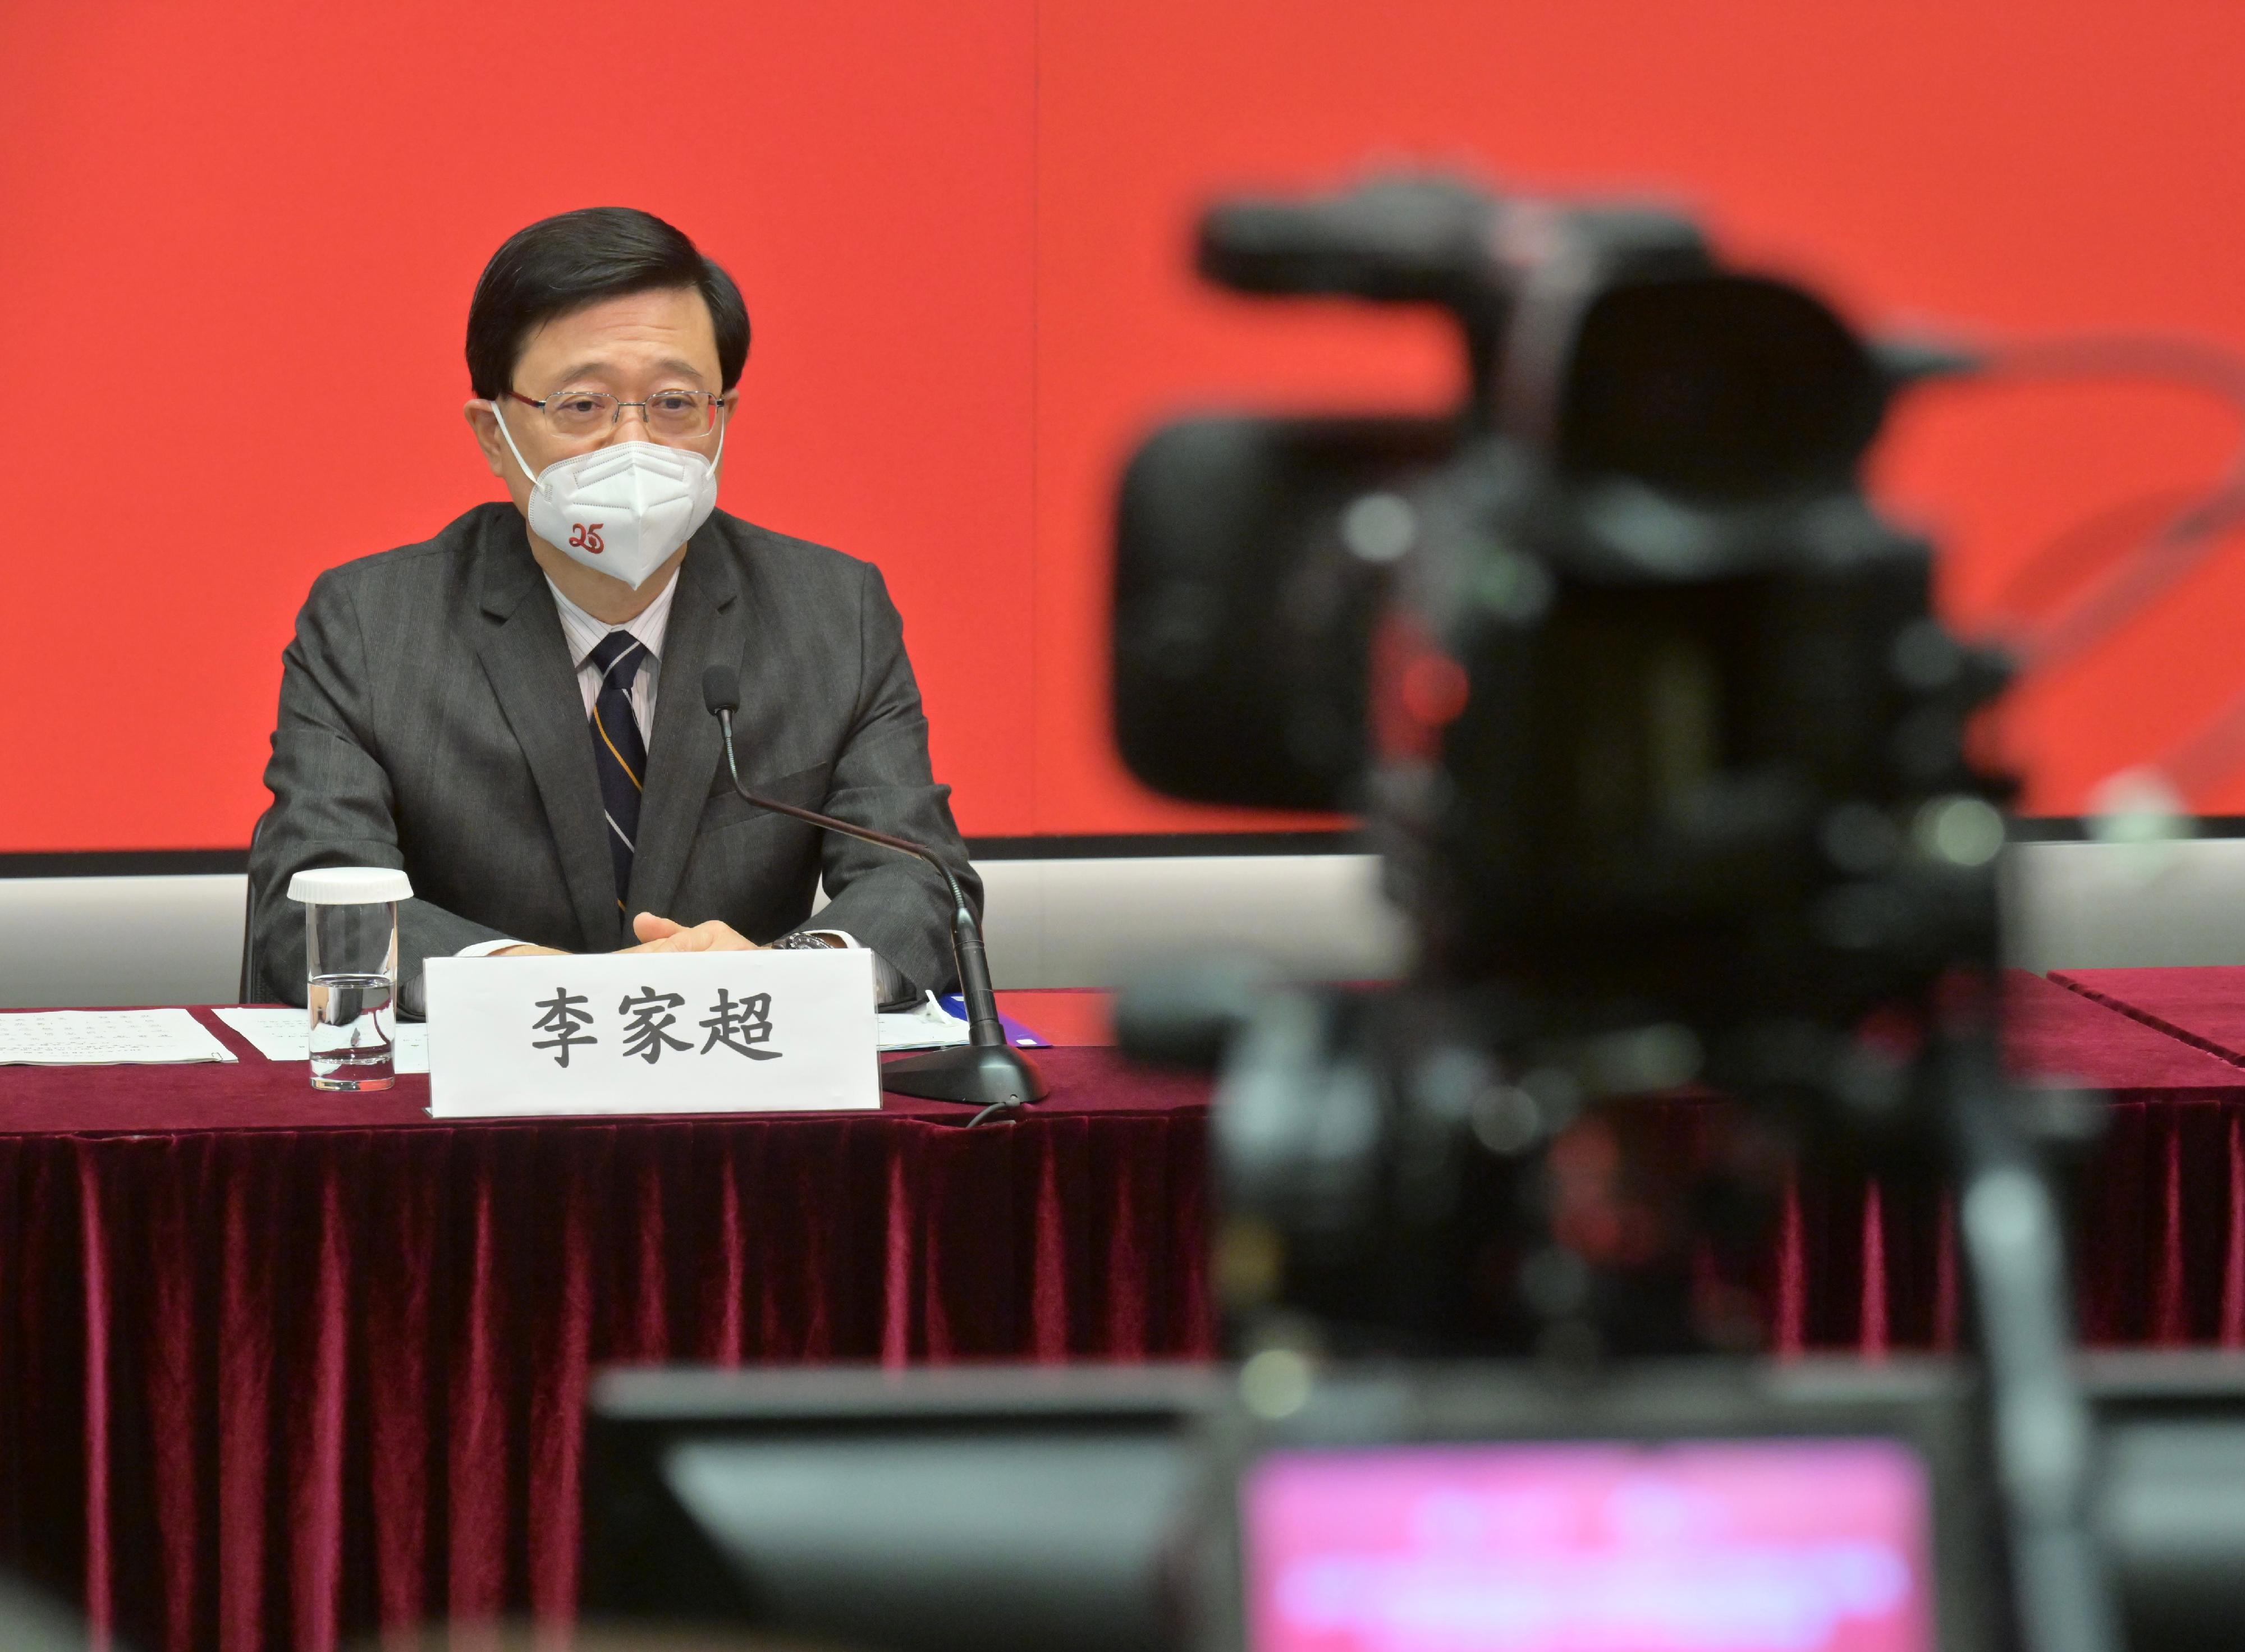 The Chief Executive, Mr John Lee, speaks at the inauguration ceremony of the Master's Degree in Public Policy Programme for senior civil servants of the Hong Kong Special Administrative Region Government of Peking University via videoconferencing today (September 28).